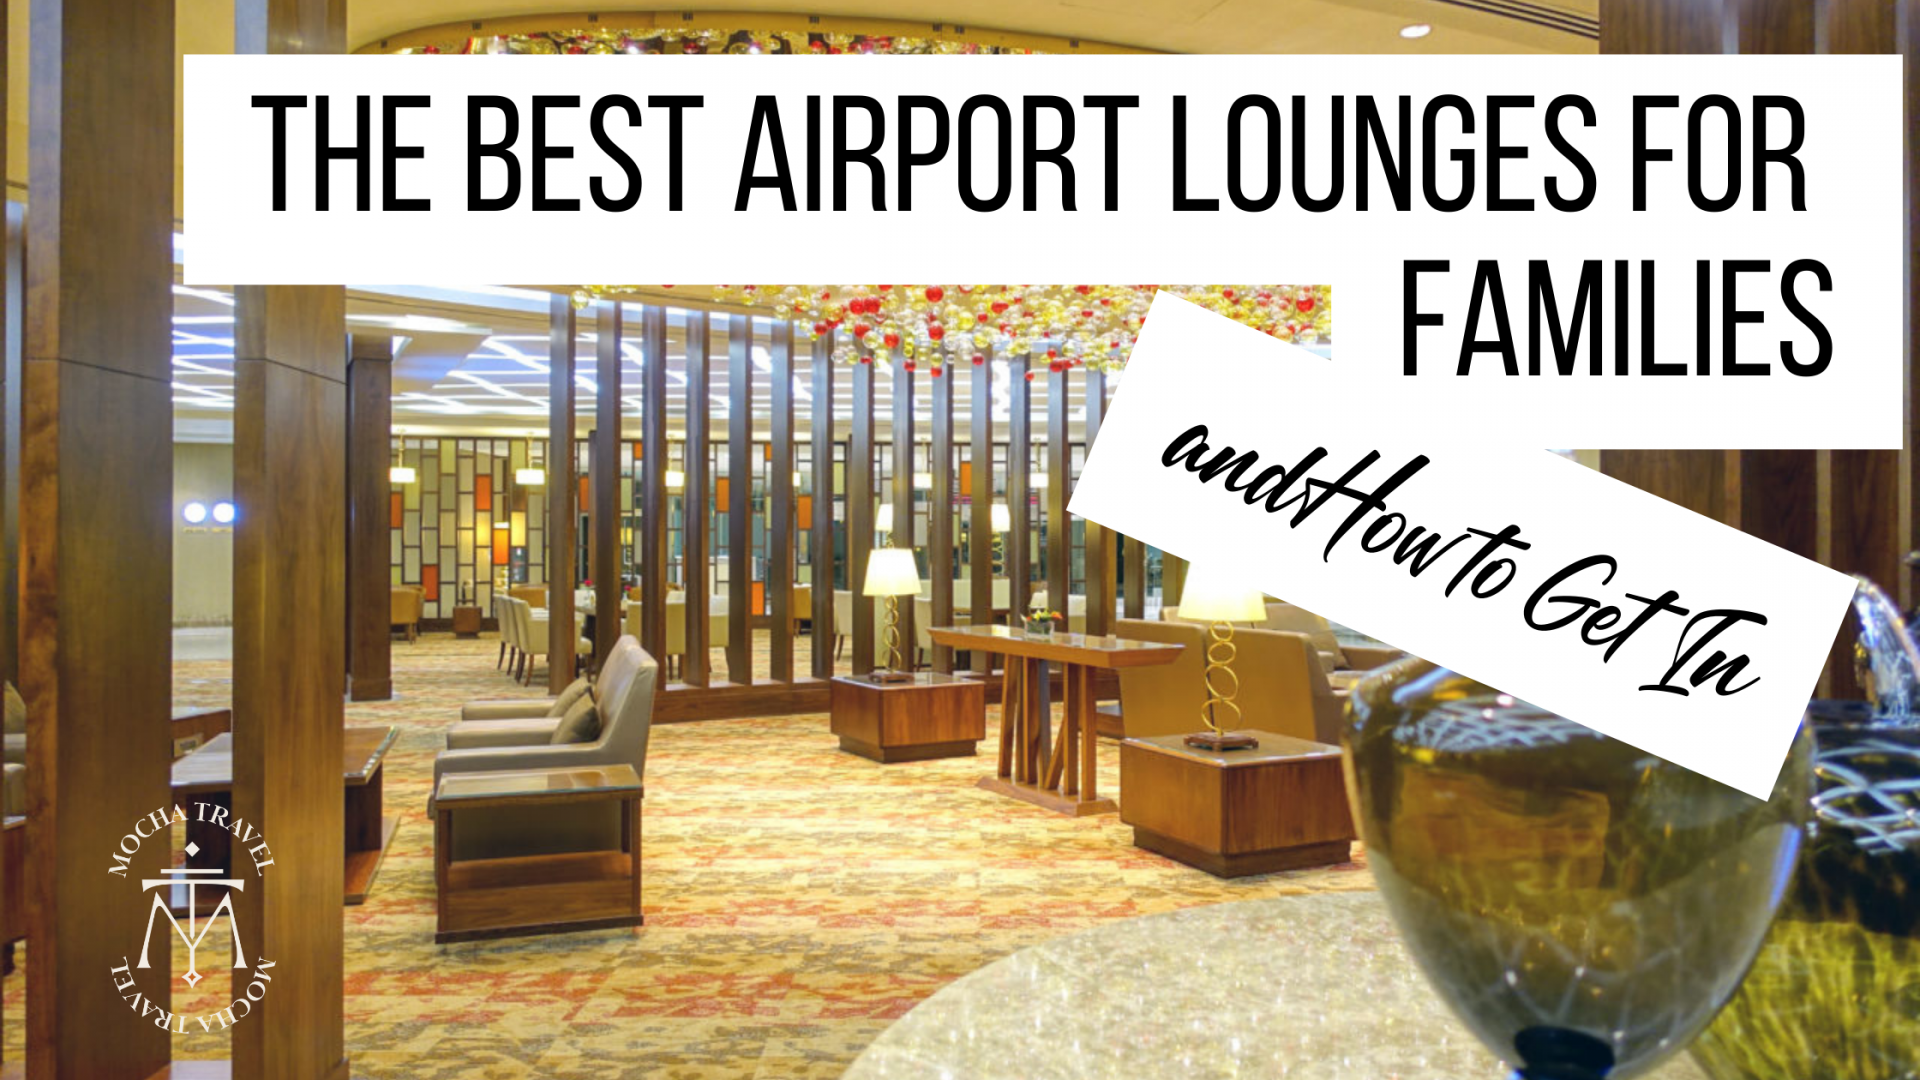 Best airport lounges for families